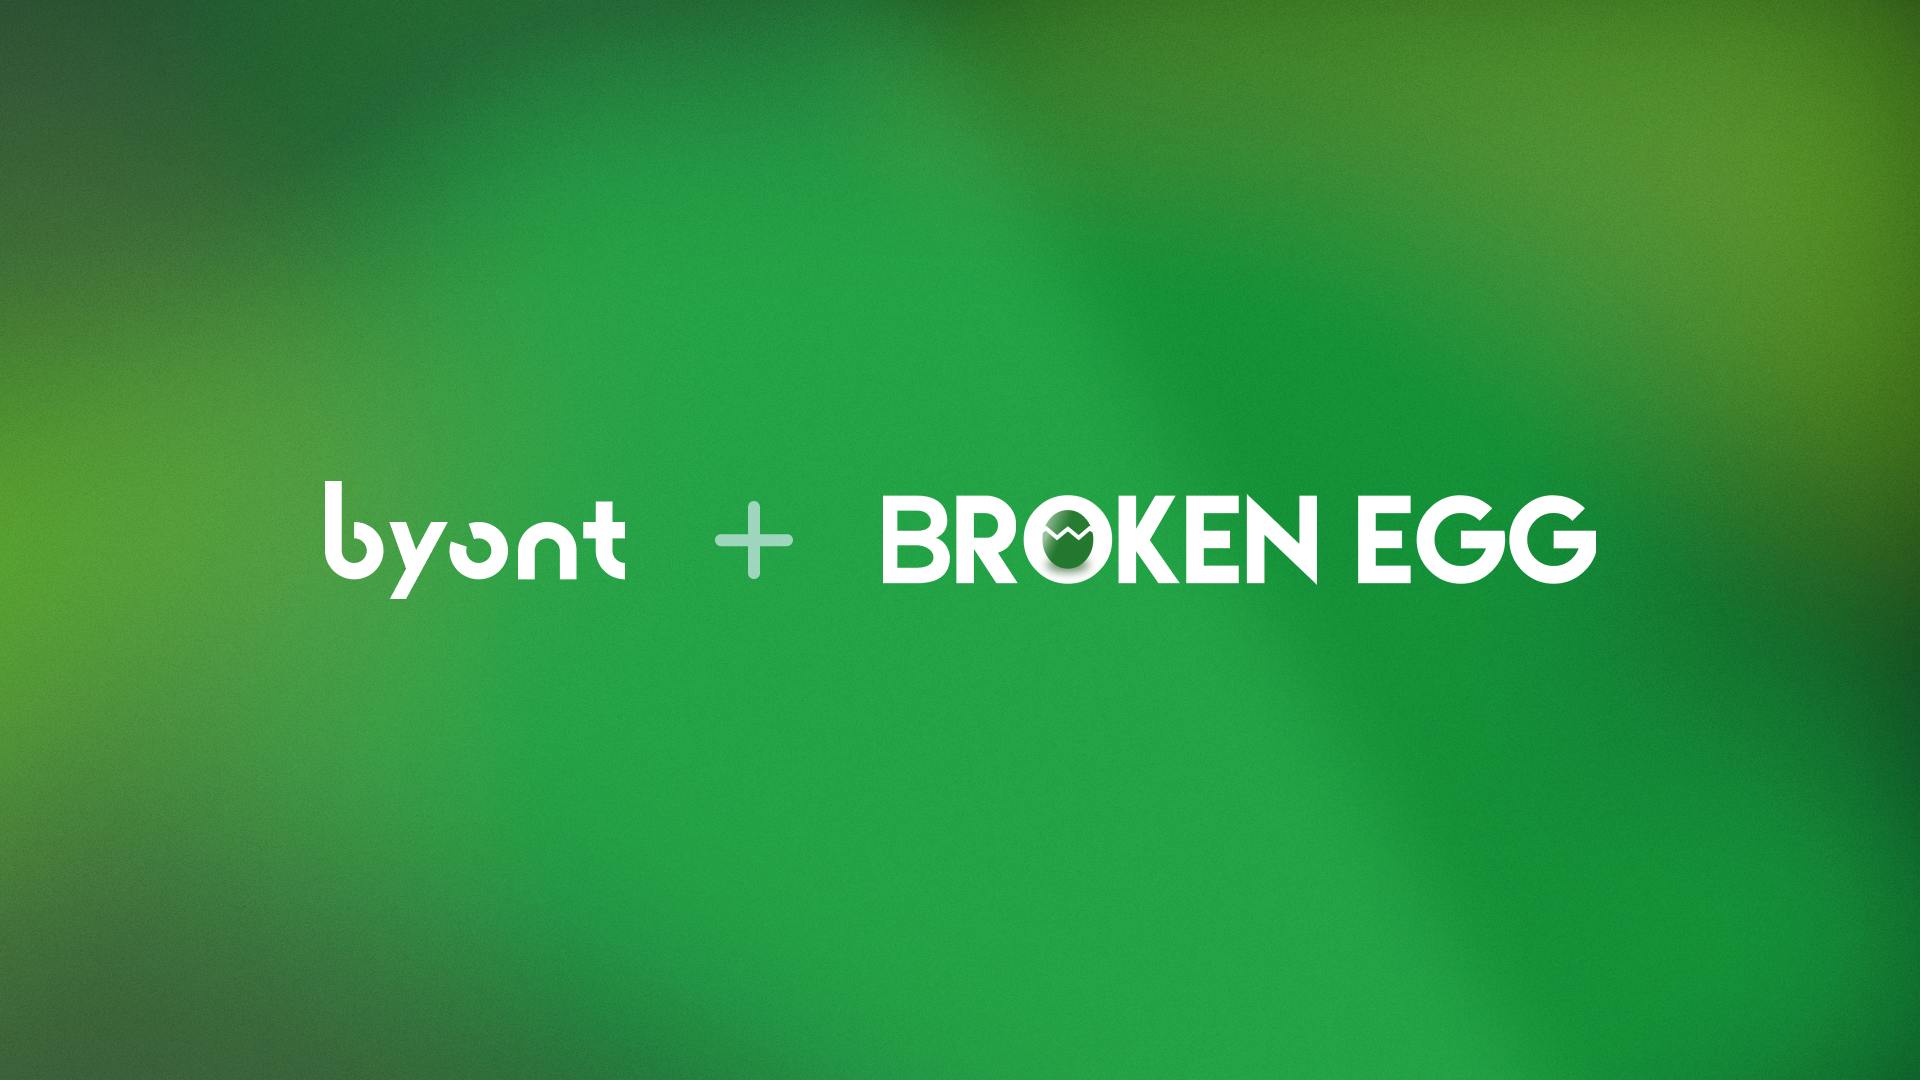 Byont Labs and BROKENEGG Partner to Expand NFT and Metaverse Offerings